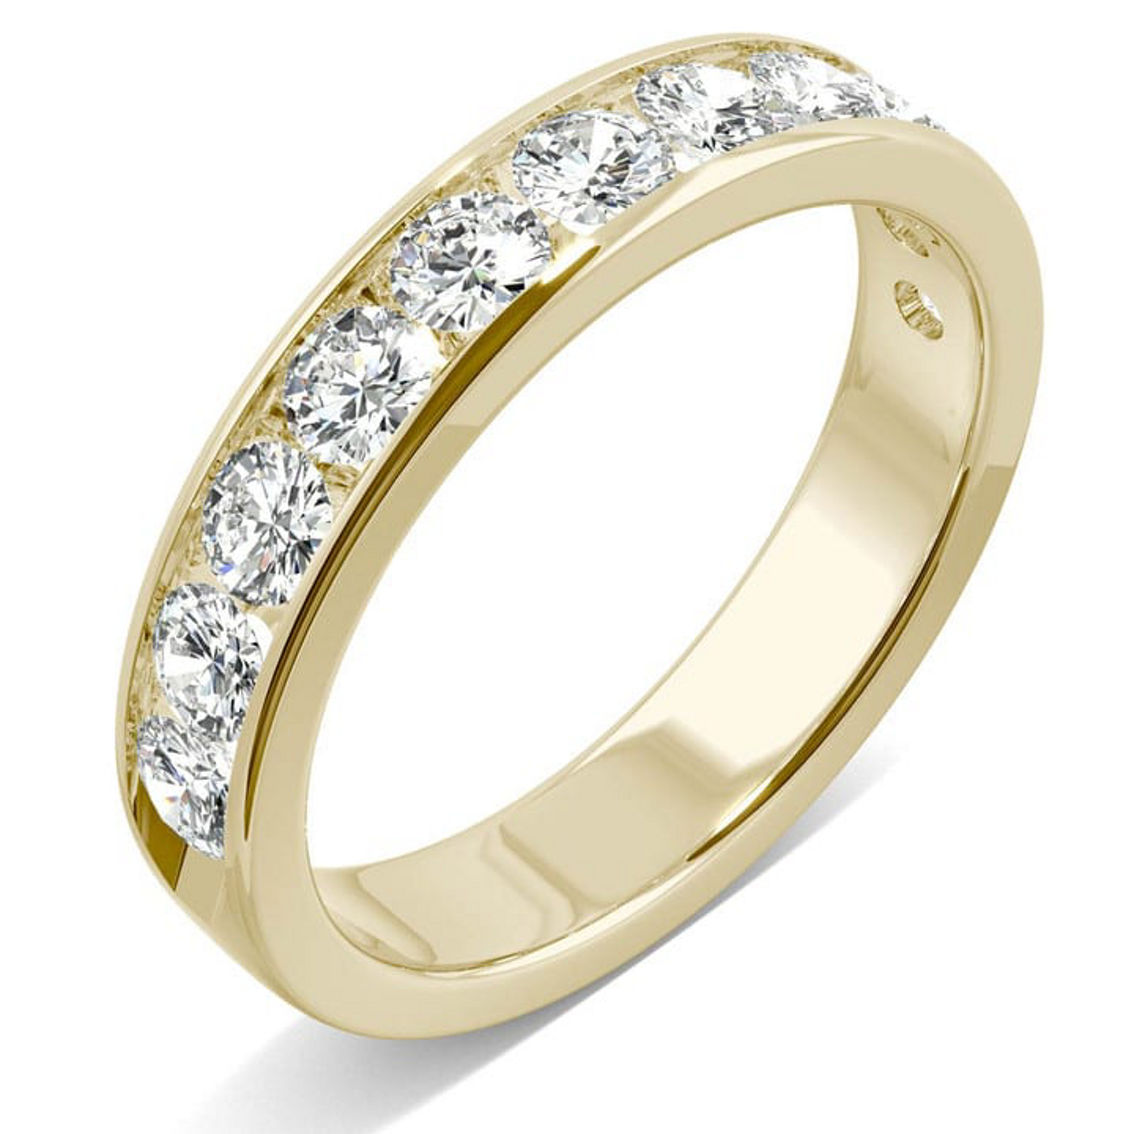 Charles & Colvard 1.10cttw Moissanite Channel Set Band in 14k Yellow Gold - Image 2 of 5